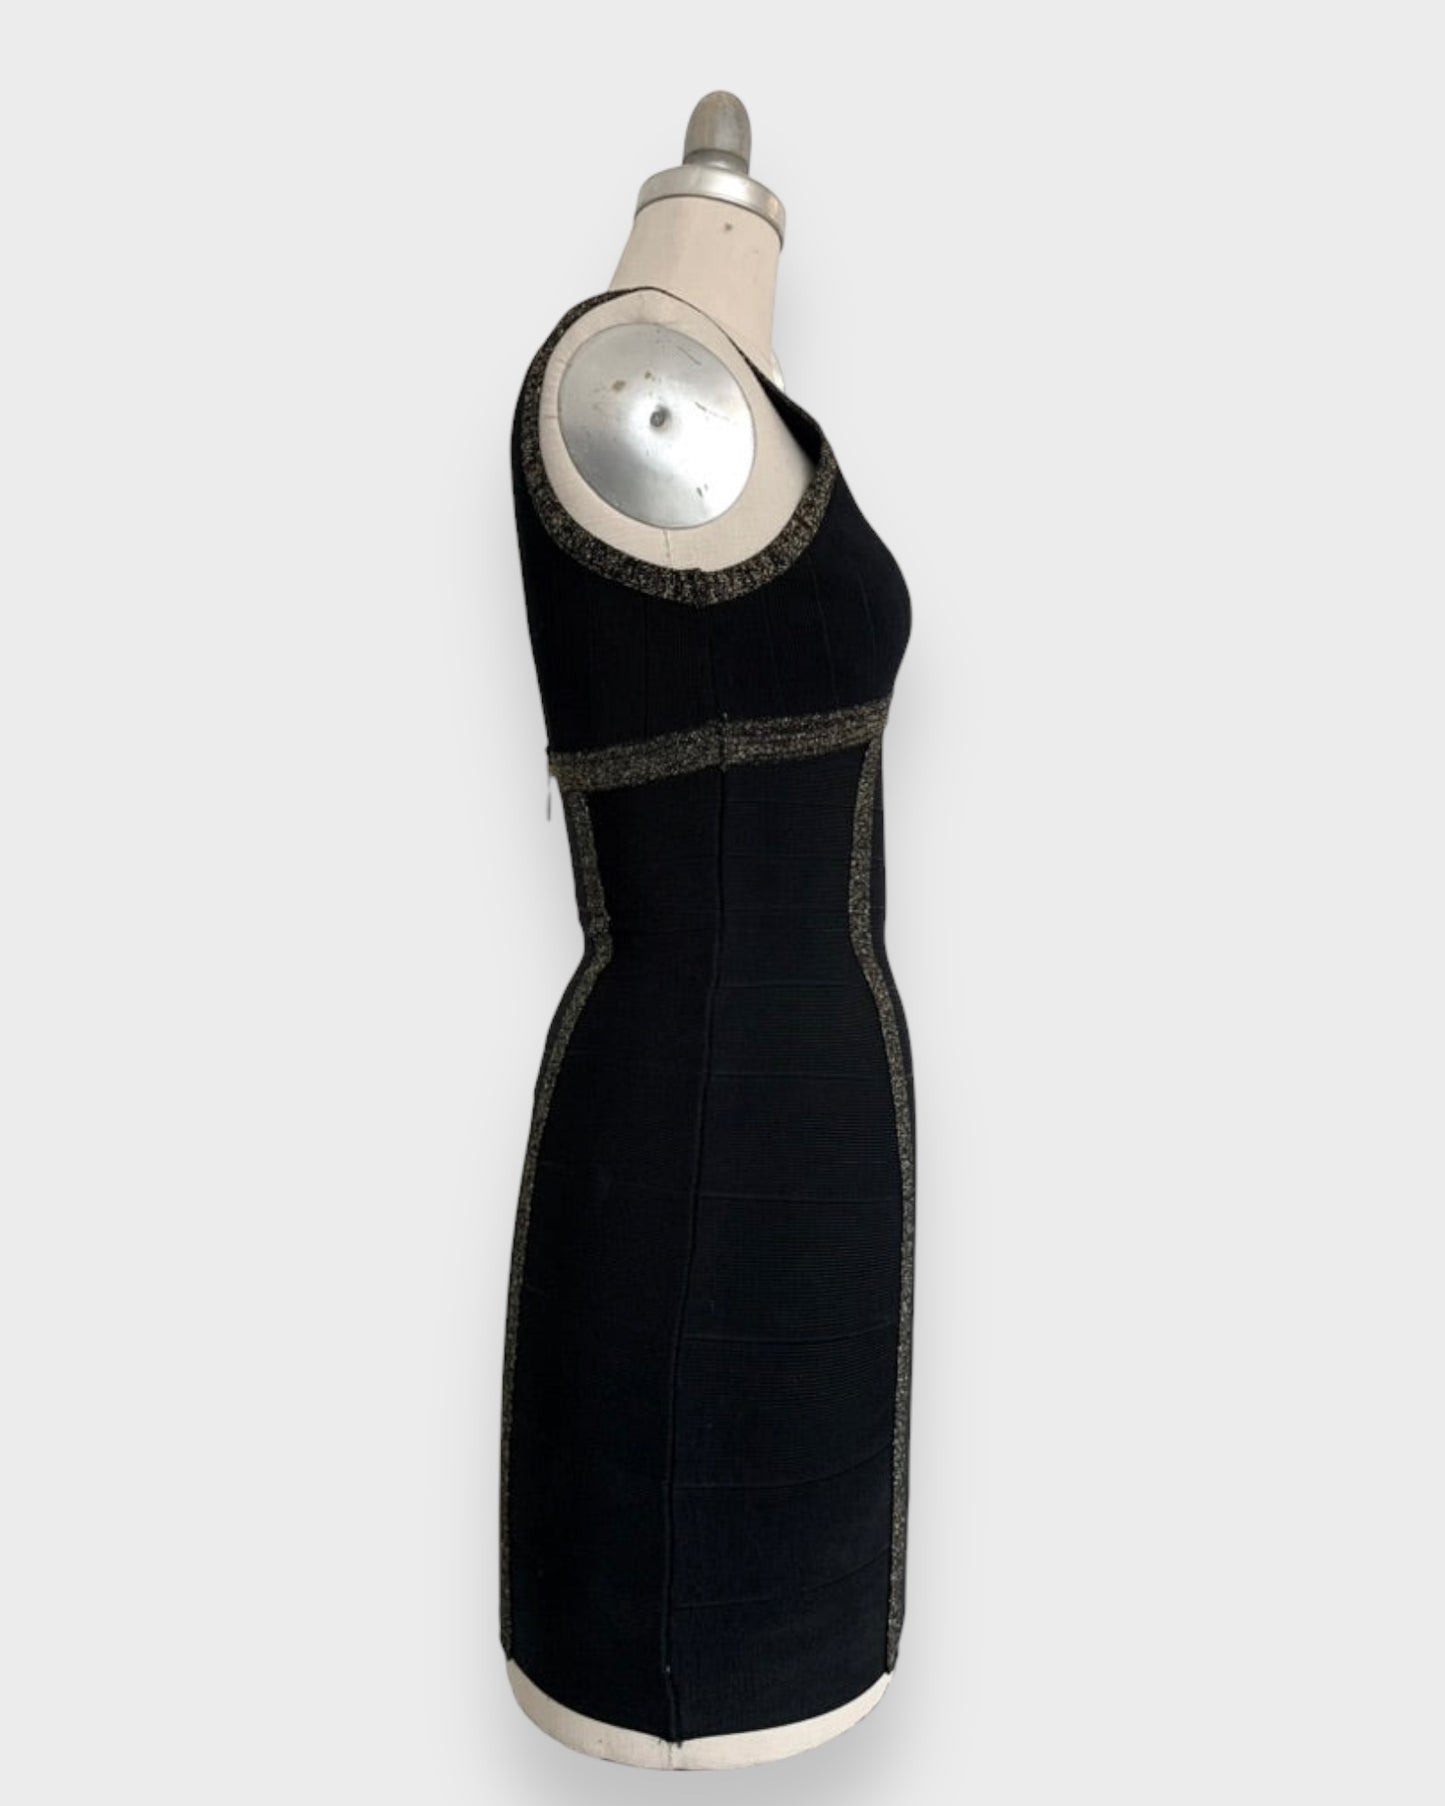 Bodycon black dress with gold accents Guess